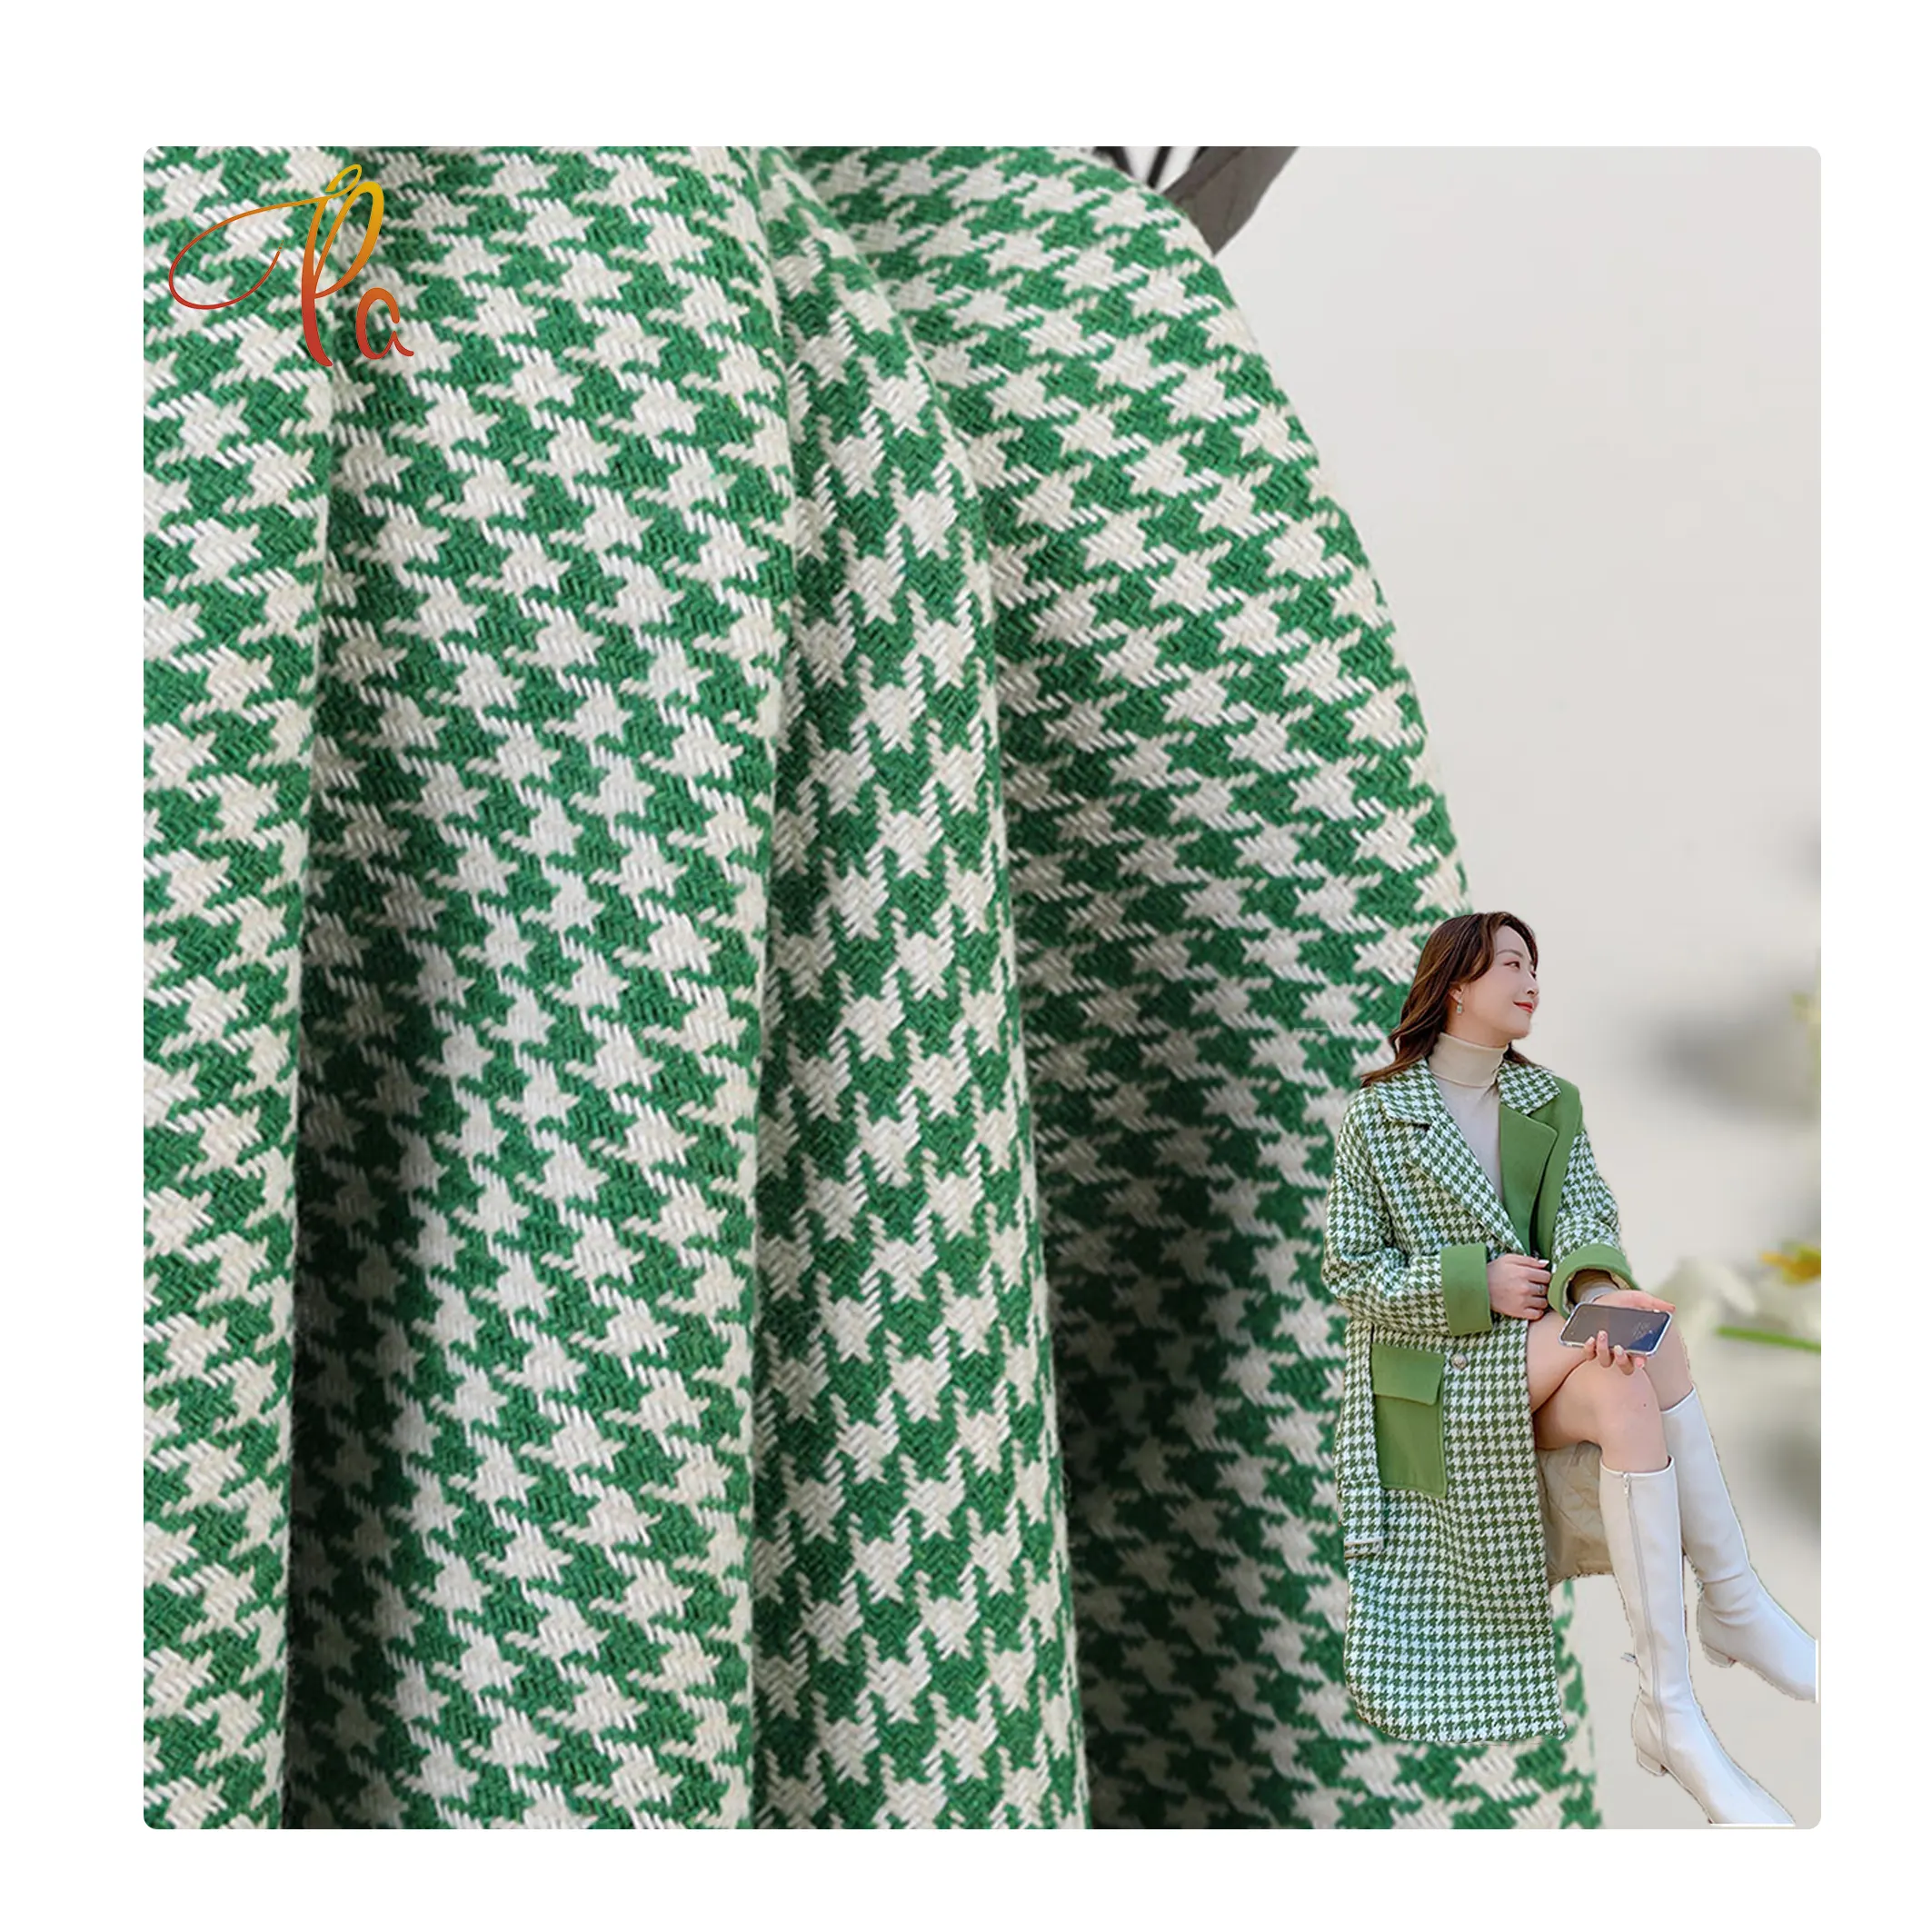 No Moq Low Price Wholesale Stock Textile Fabric Polyester Women's Coat Woven Tweed Fabric